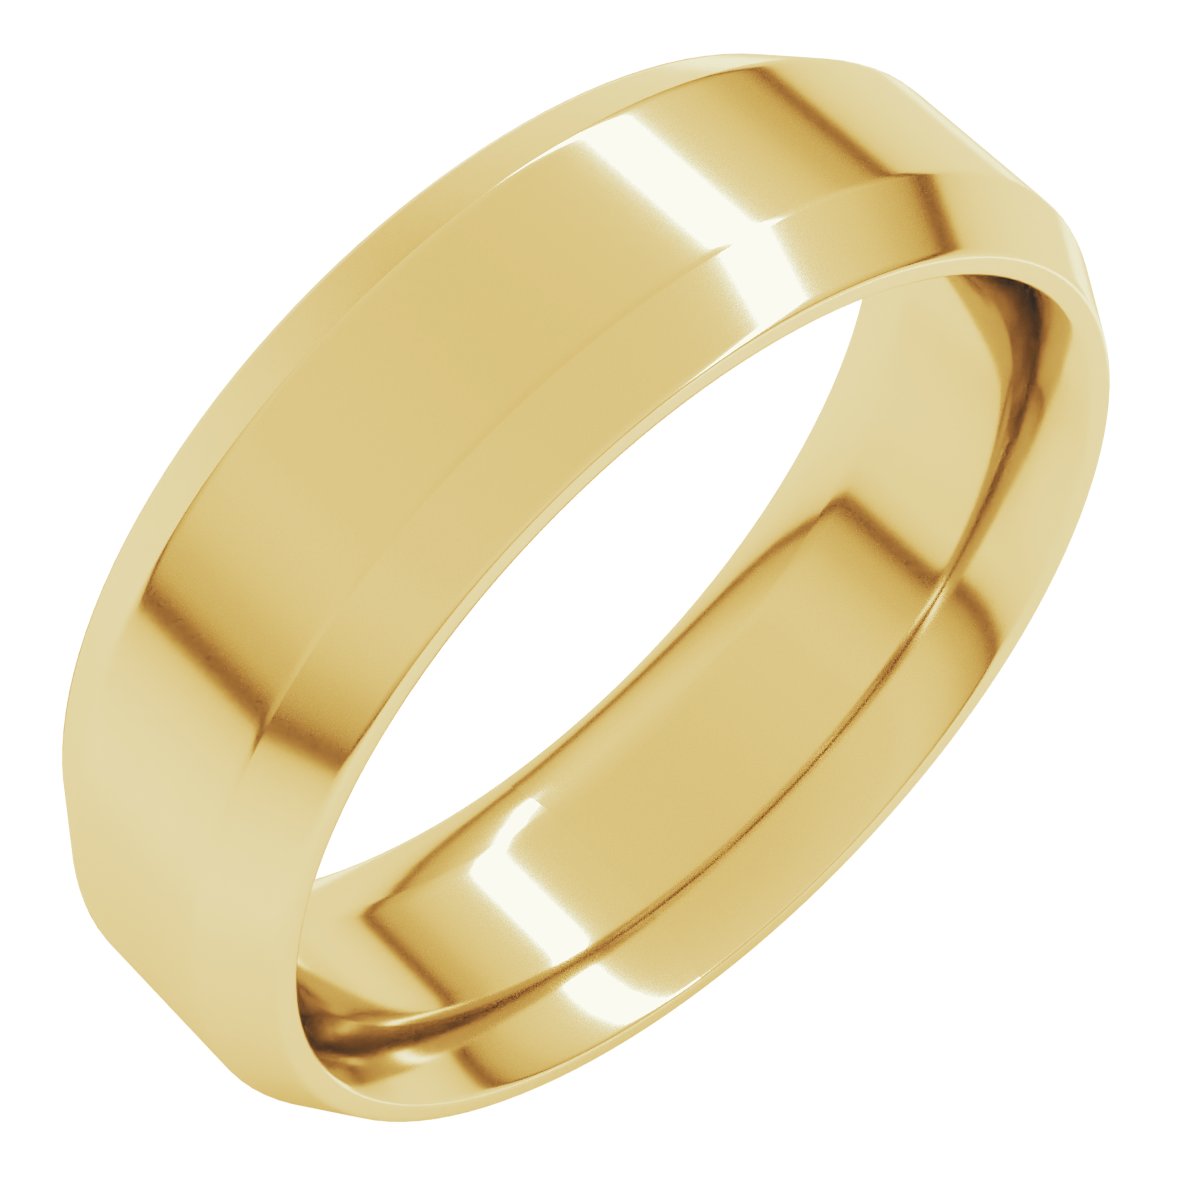 14K Yellow 6 mm Beveled-Edge Comfort-Fit Band Size 11